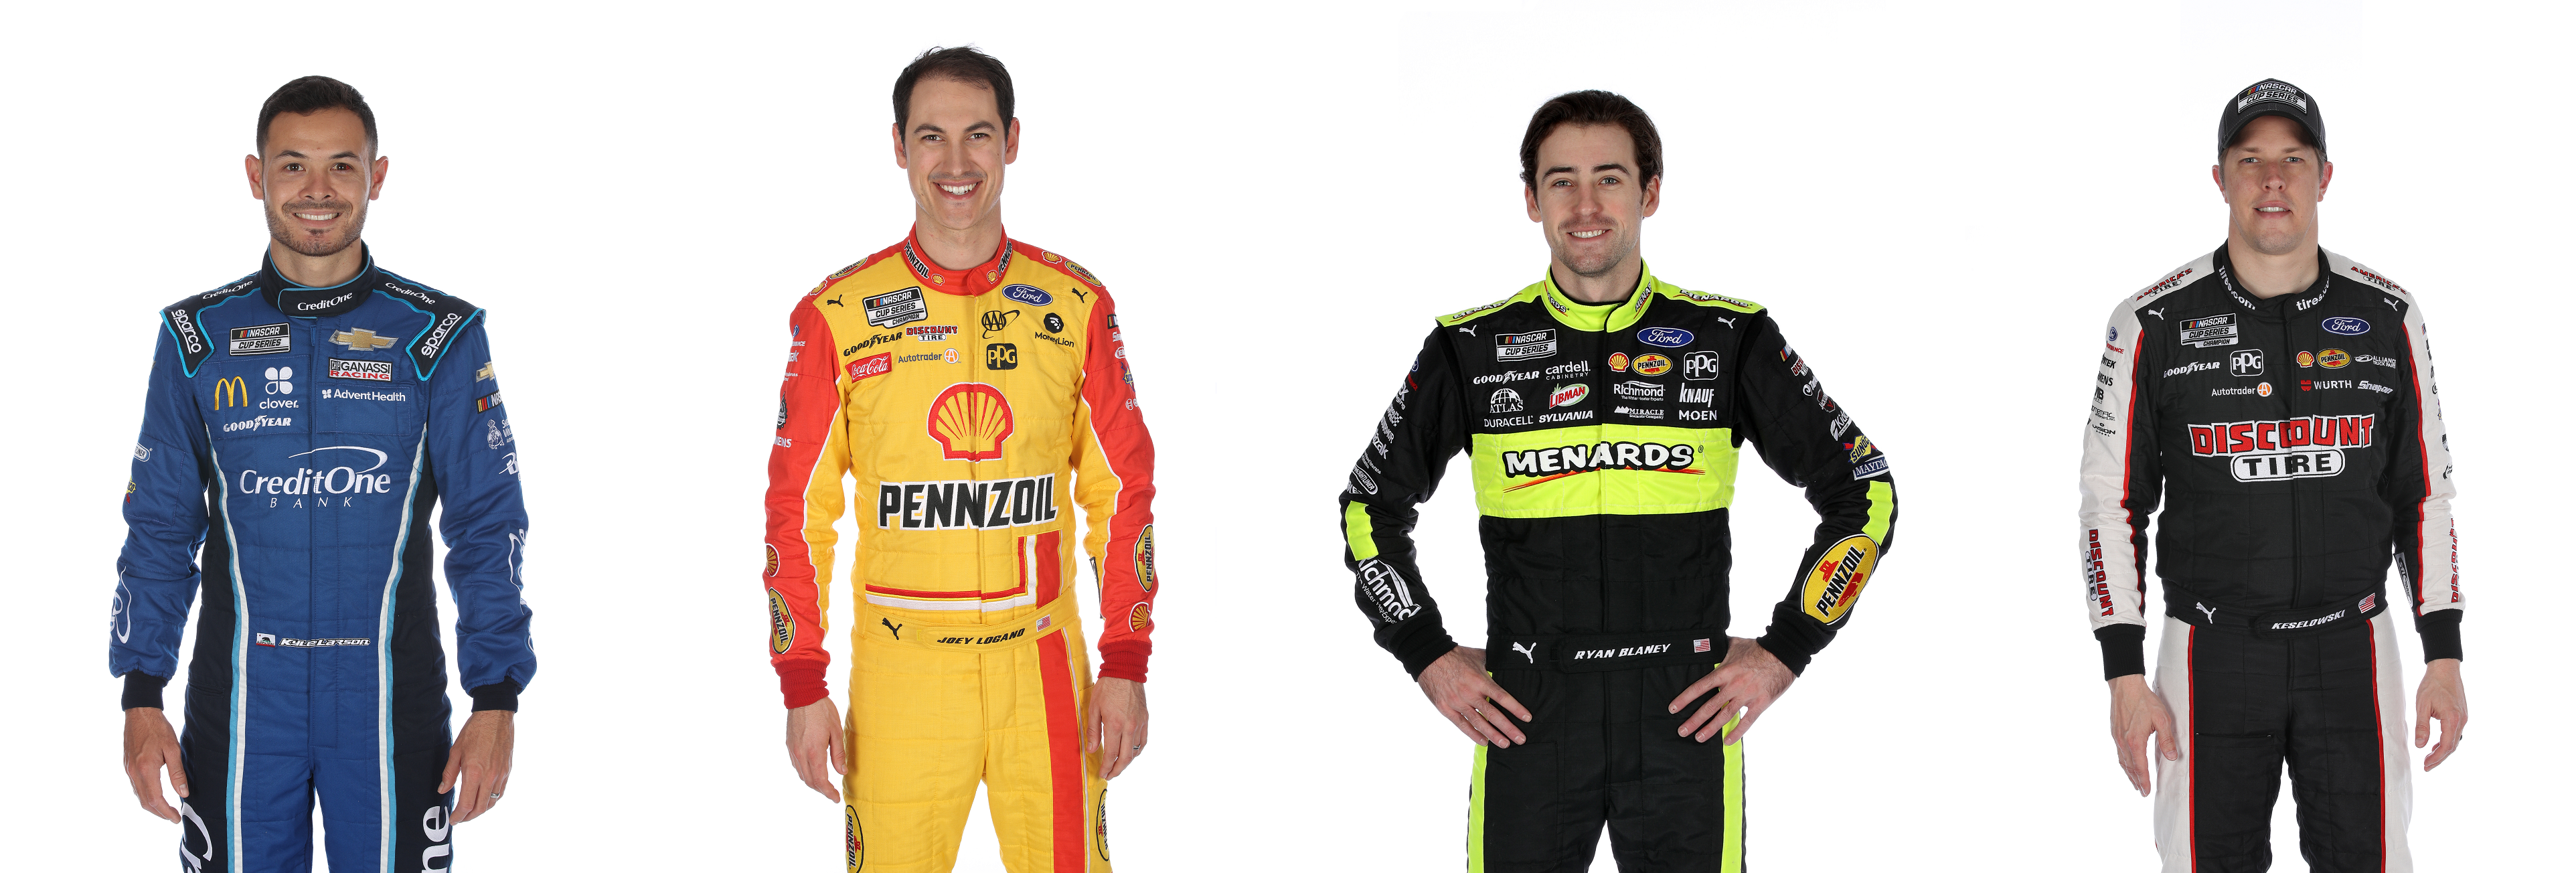 In essence, the TPF panelists throw the dice for these Pennzoil 400 picks.